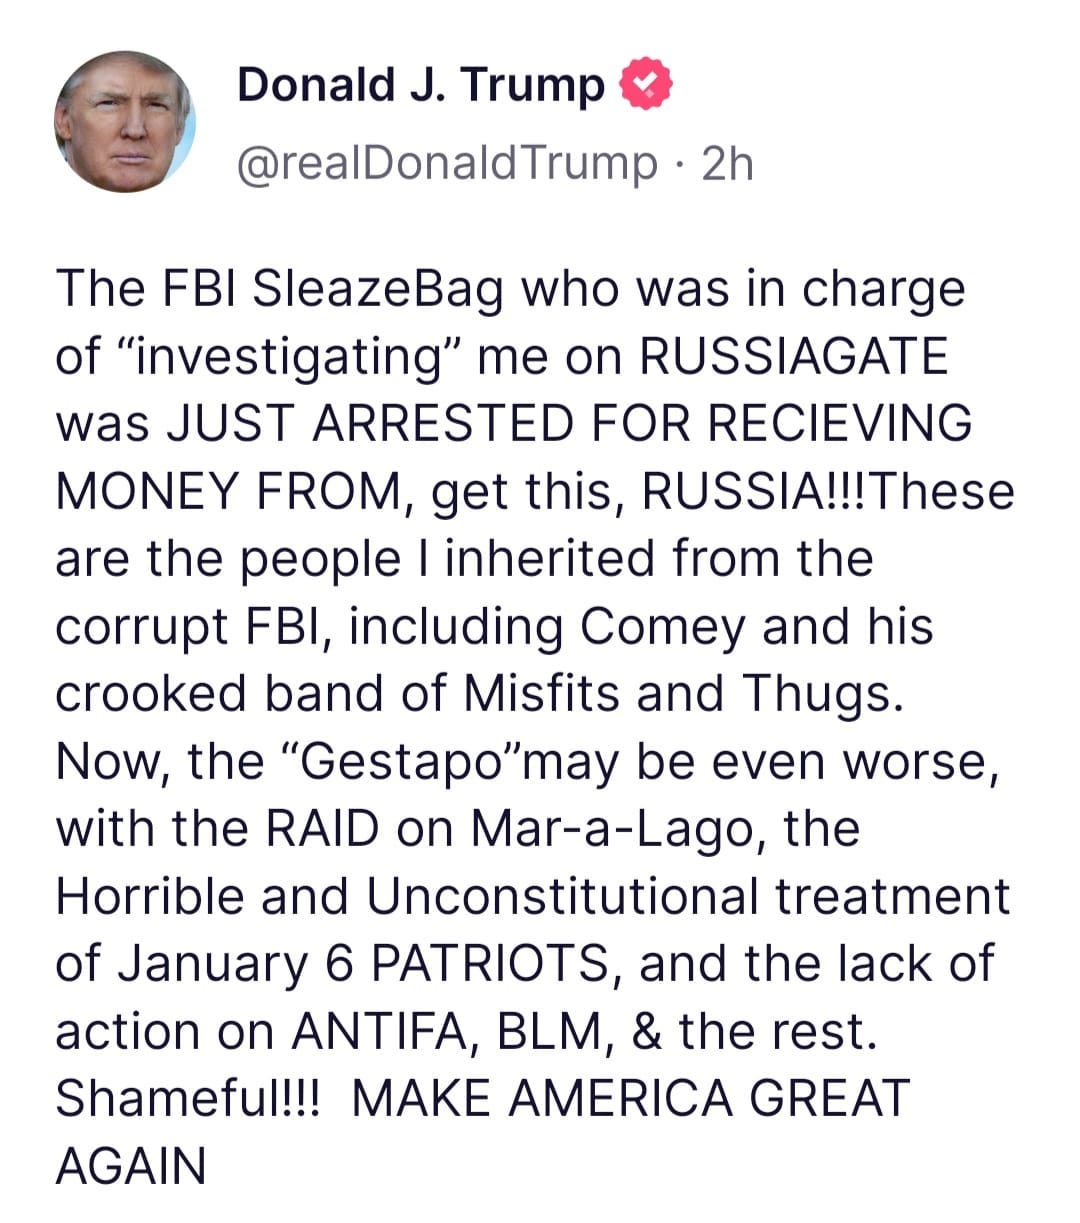 May be a Twitter screenshot of 1 person and text that says 'Donald J. Trump @realDonaldTrump 2h The FBI SleazeBag who was in charge of "investigating" me on RUSSIAGATE was JUST ARRESTED FOR RECIEVING MONEY FROM get this, RUSSIA!!!These are the people inherited from the corrupt FBI, including Comey and his crooked band of Misfits and Thugs. Now, the "Gestapo"may be even worse, with the RAID on Mar-a-Lago, the Horrible and Unconstitutional treatment of January 6 PATRIOTS, and the lack of action on ANTIFA, BLM, & the rest. Shameful!!! MAKE AMERICA GREAT AGAIN'